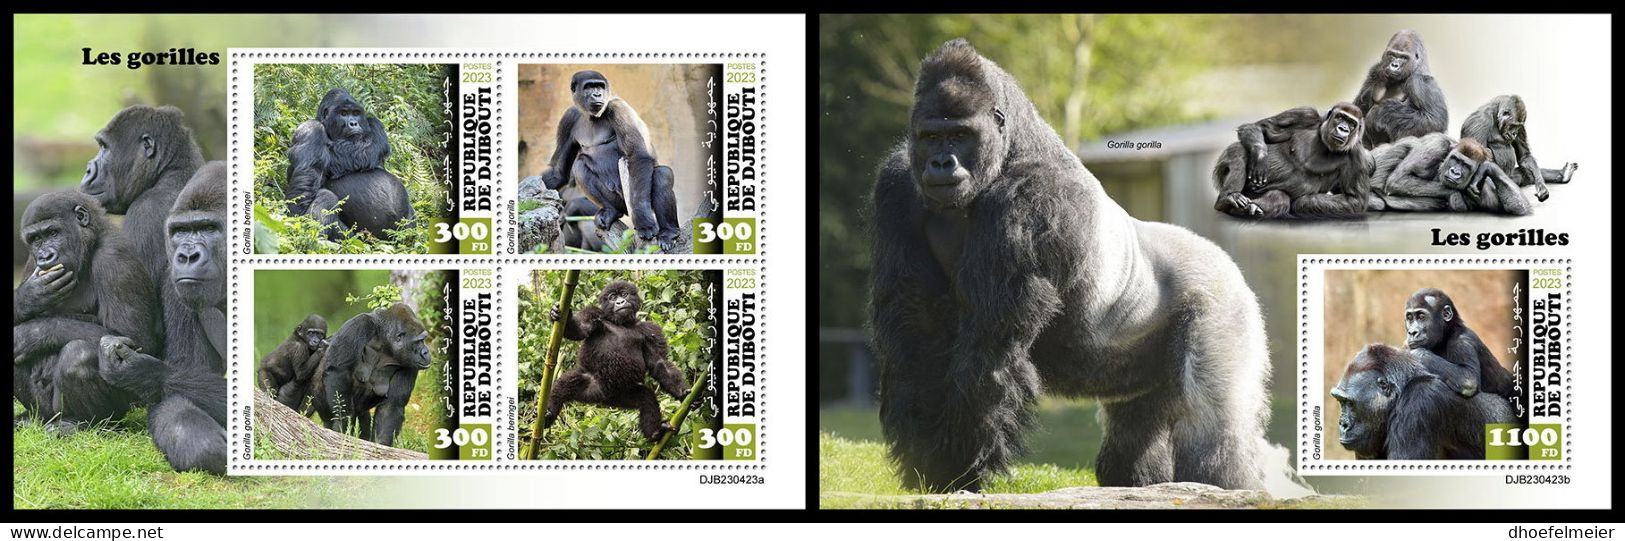 DJIBOUTI 2023 MNH Gorillas M/S+S/S – OFFICIAL ISSUE – DHQ2403 - Gorilas